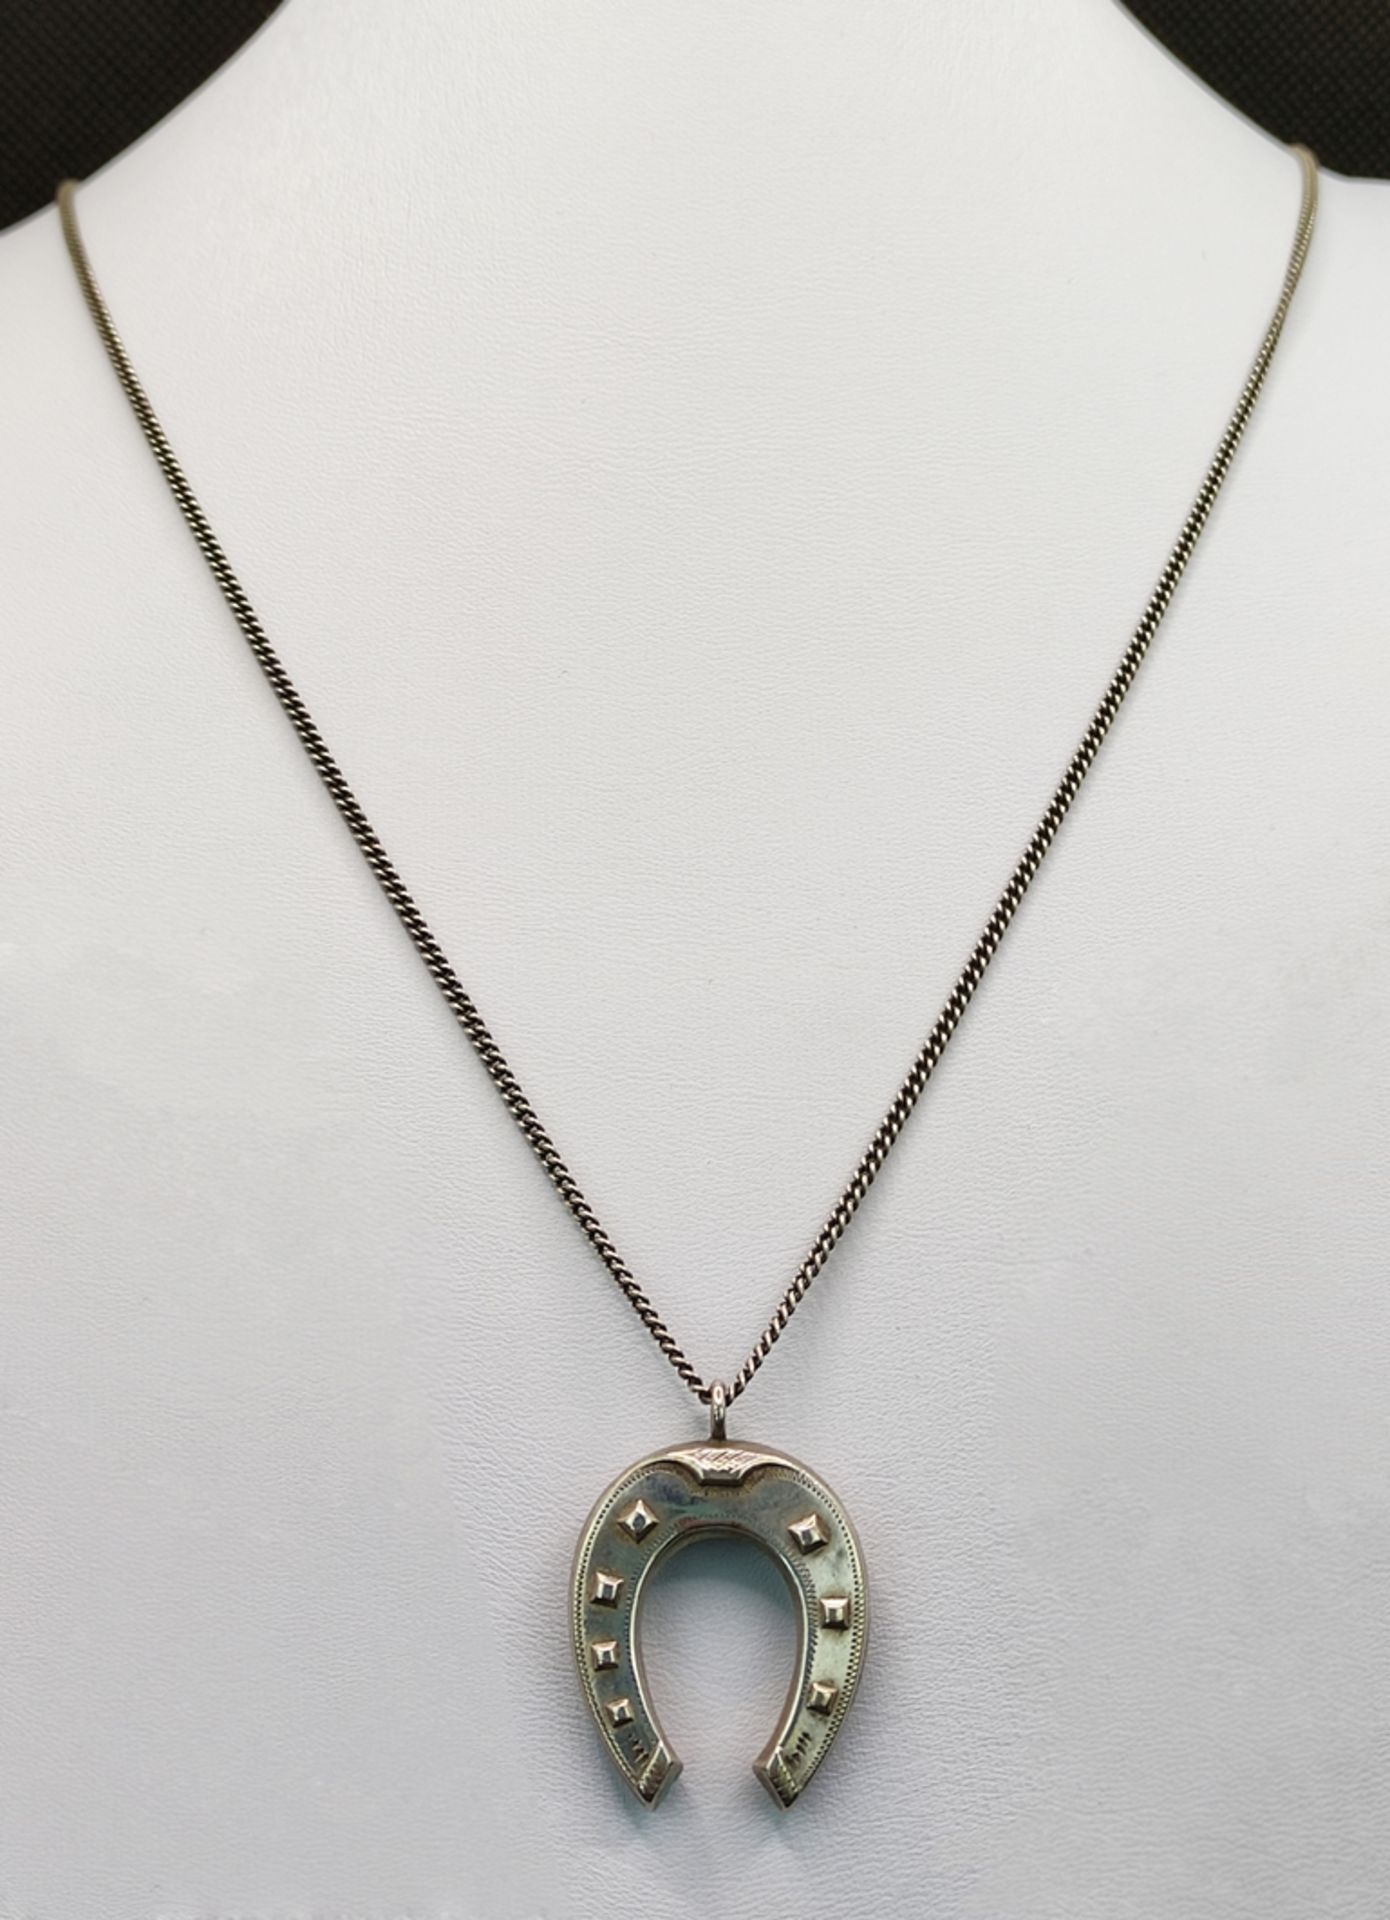 Horseshoe necklace, double sided horseshoe pendant on chain, 835 silver, length 58cm, total weight  - Image 2 of 3